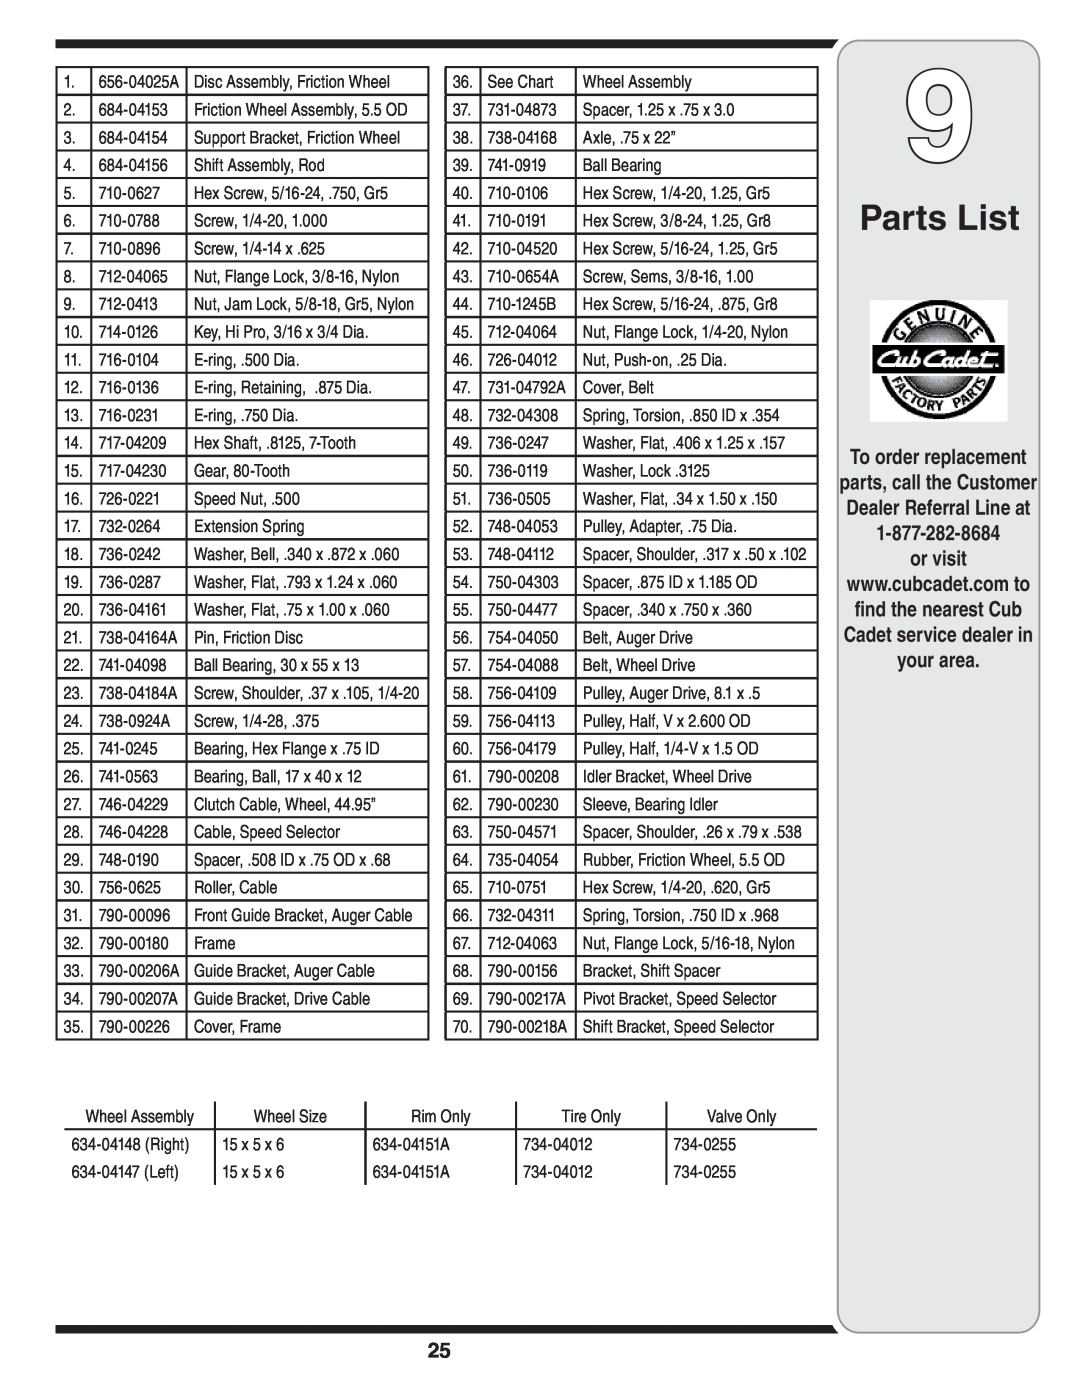 Cub Cadet WE 26 warranty Parts List, To order replacement, or visit, parts, call the Customer Dealer Referral Line at 